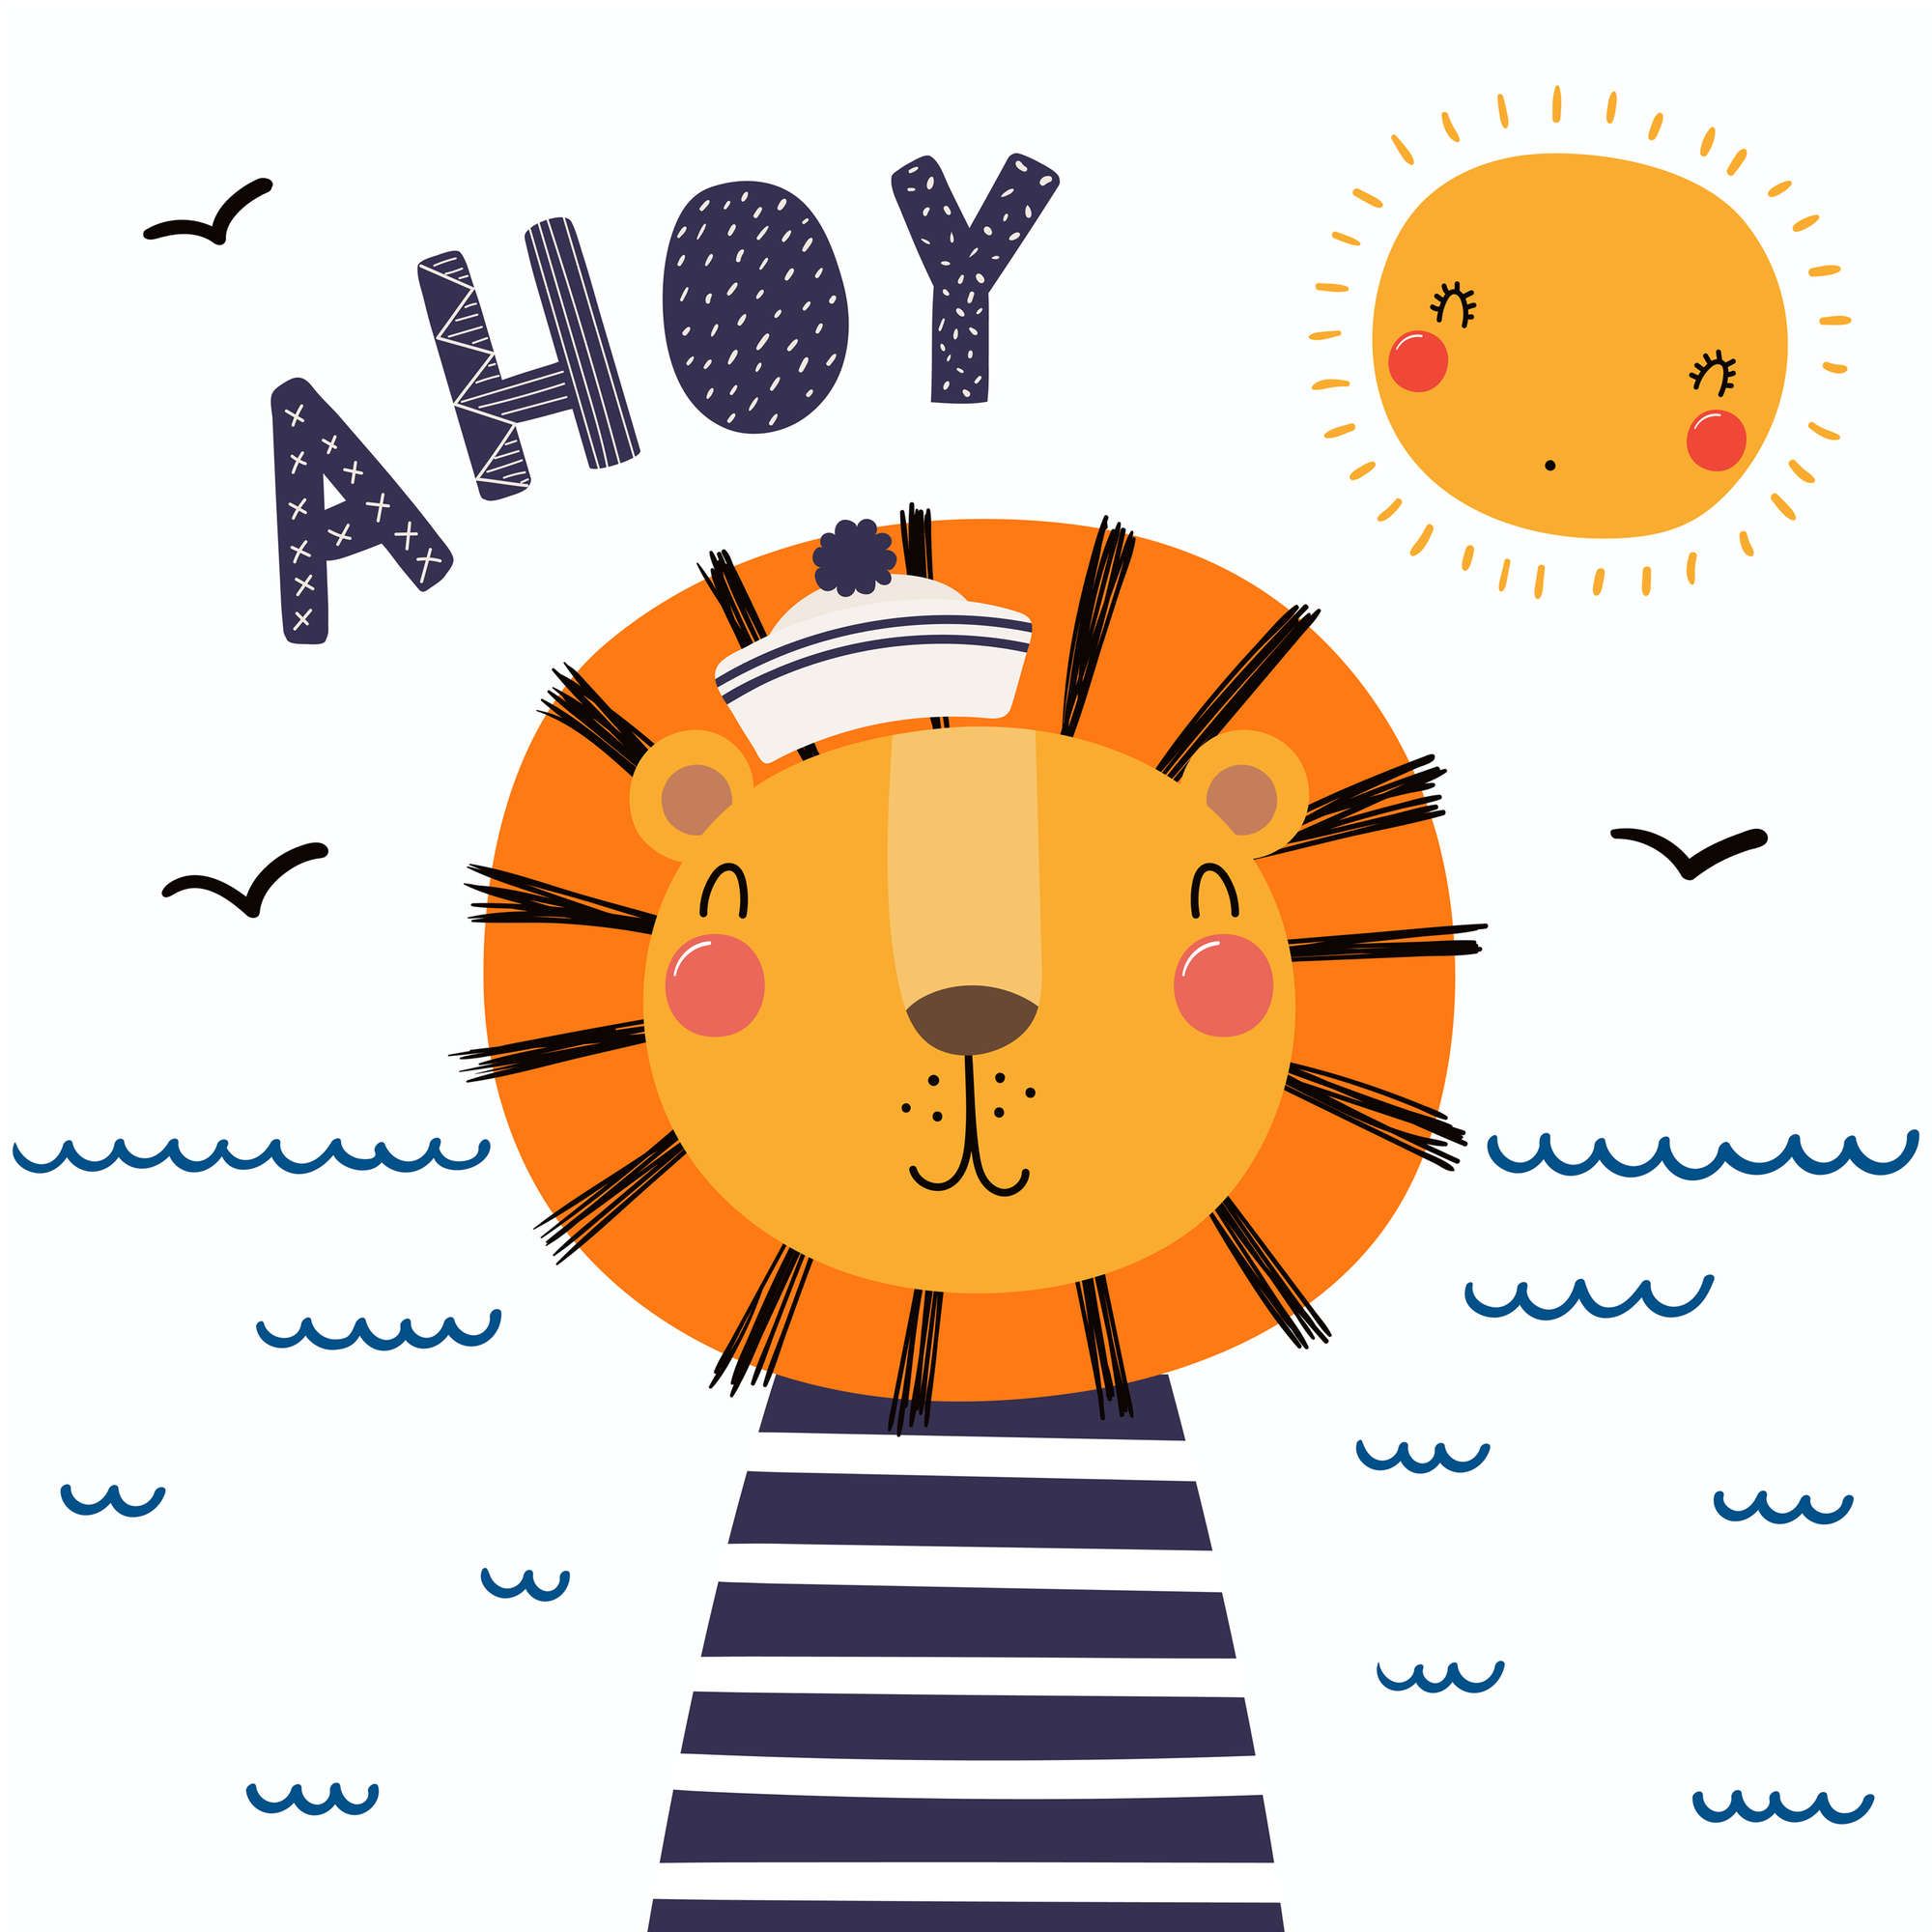             Photo wallpaper for children's room with lion pirate - Smooth & slightly shiny non-woven
        